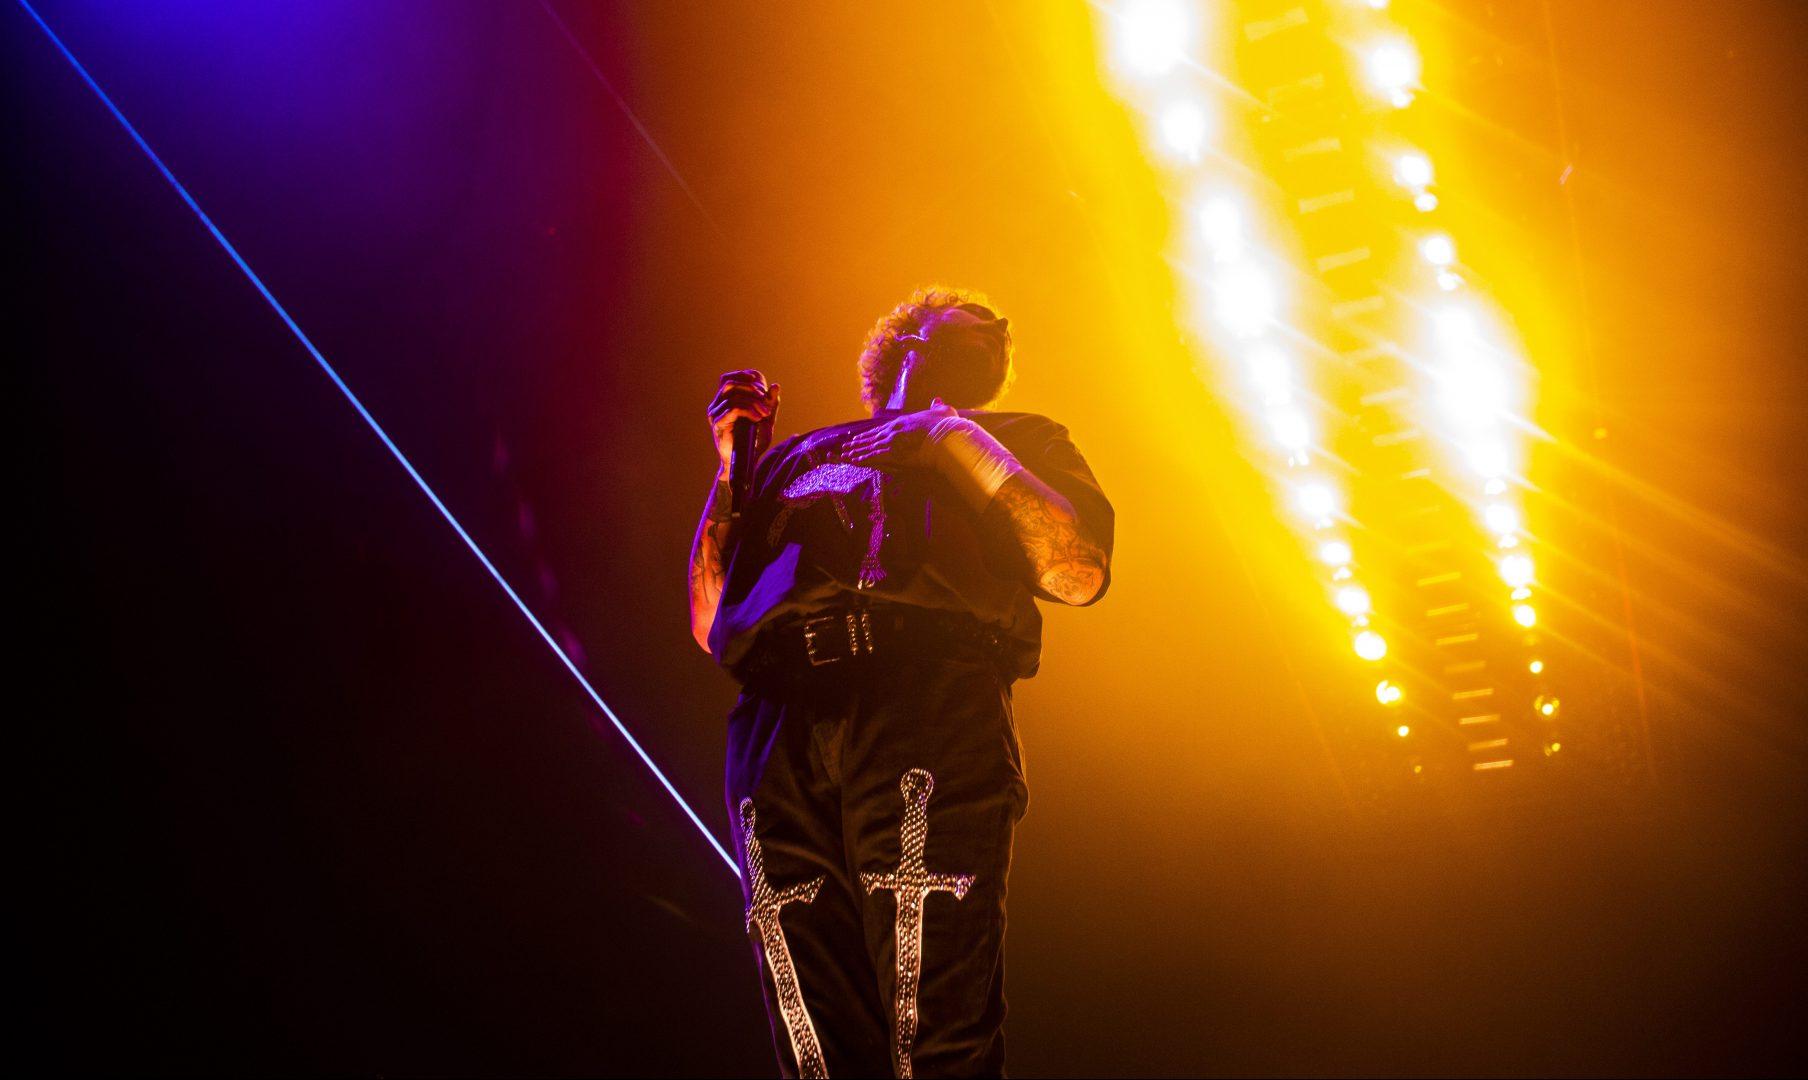 American rapper Post Malone paused for a moment during the song Better Now at the Save Mart Center on Saturday, Sept. 21, 2019. (Larry Valenzuela/The Collegian)